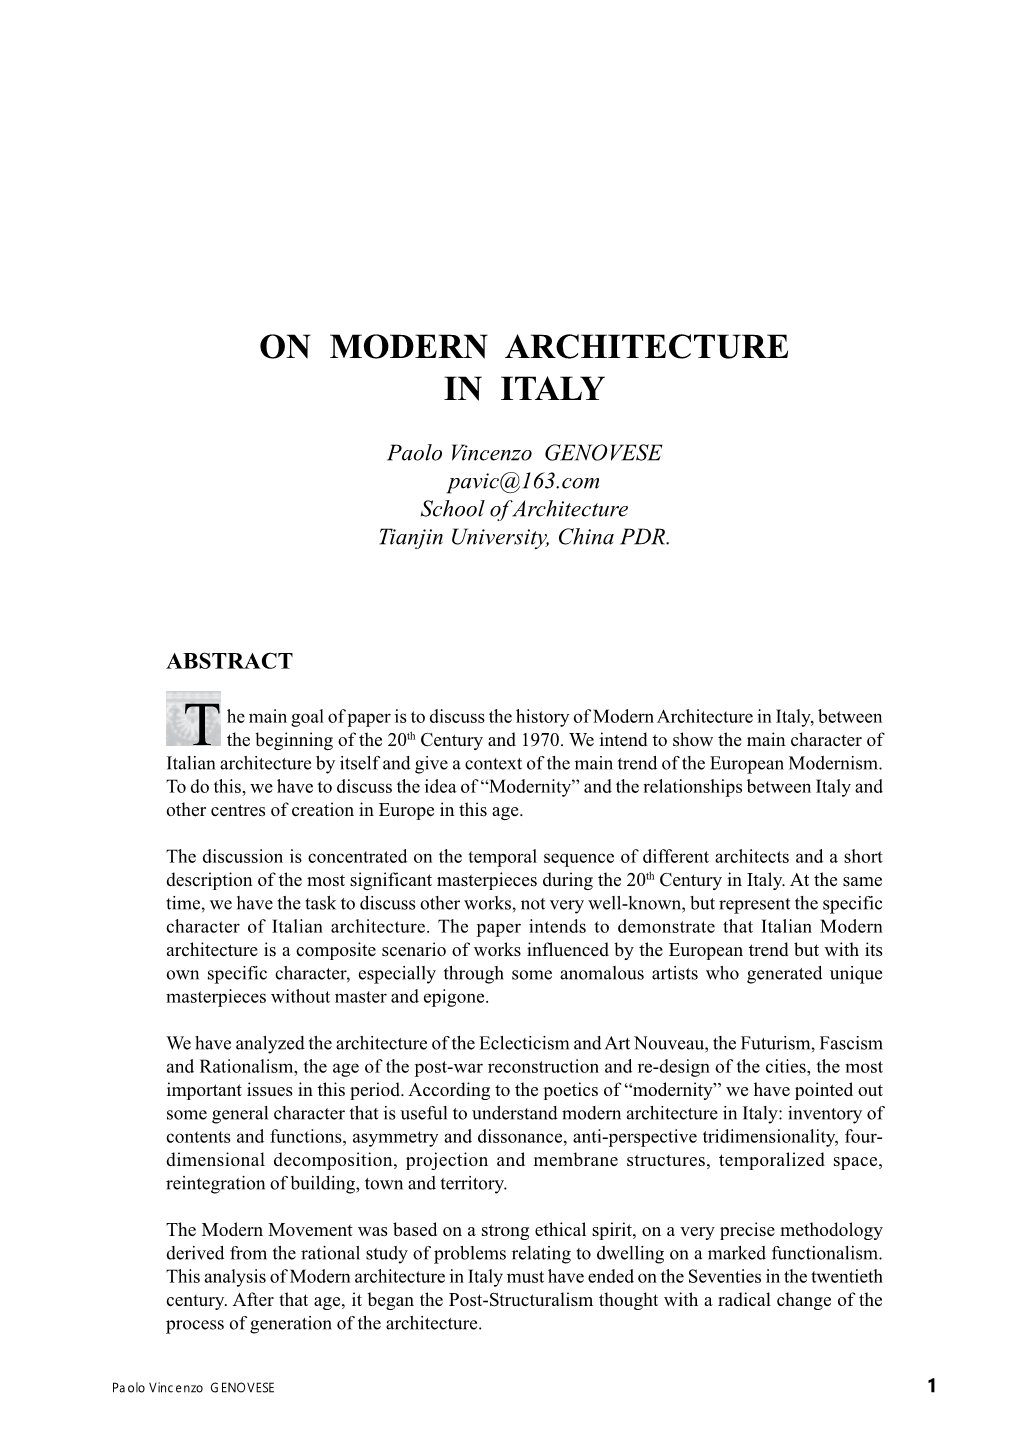 On Modern Architecture in Italy